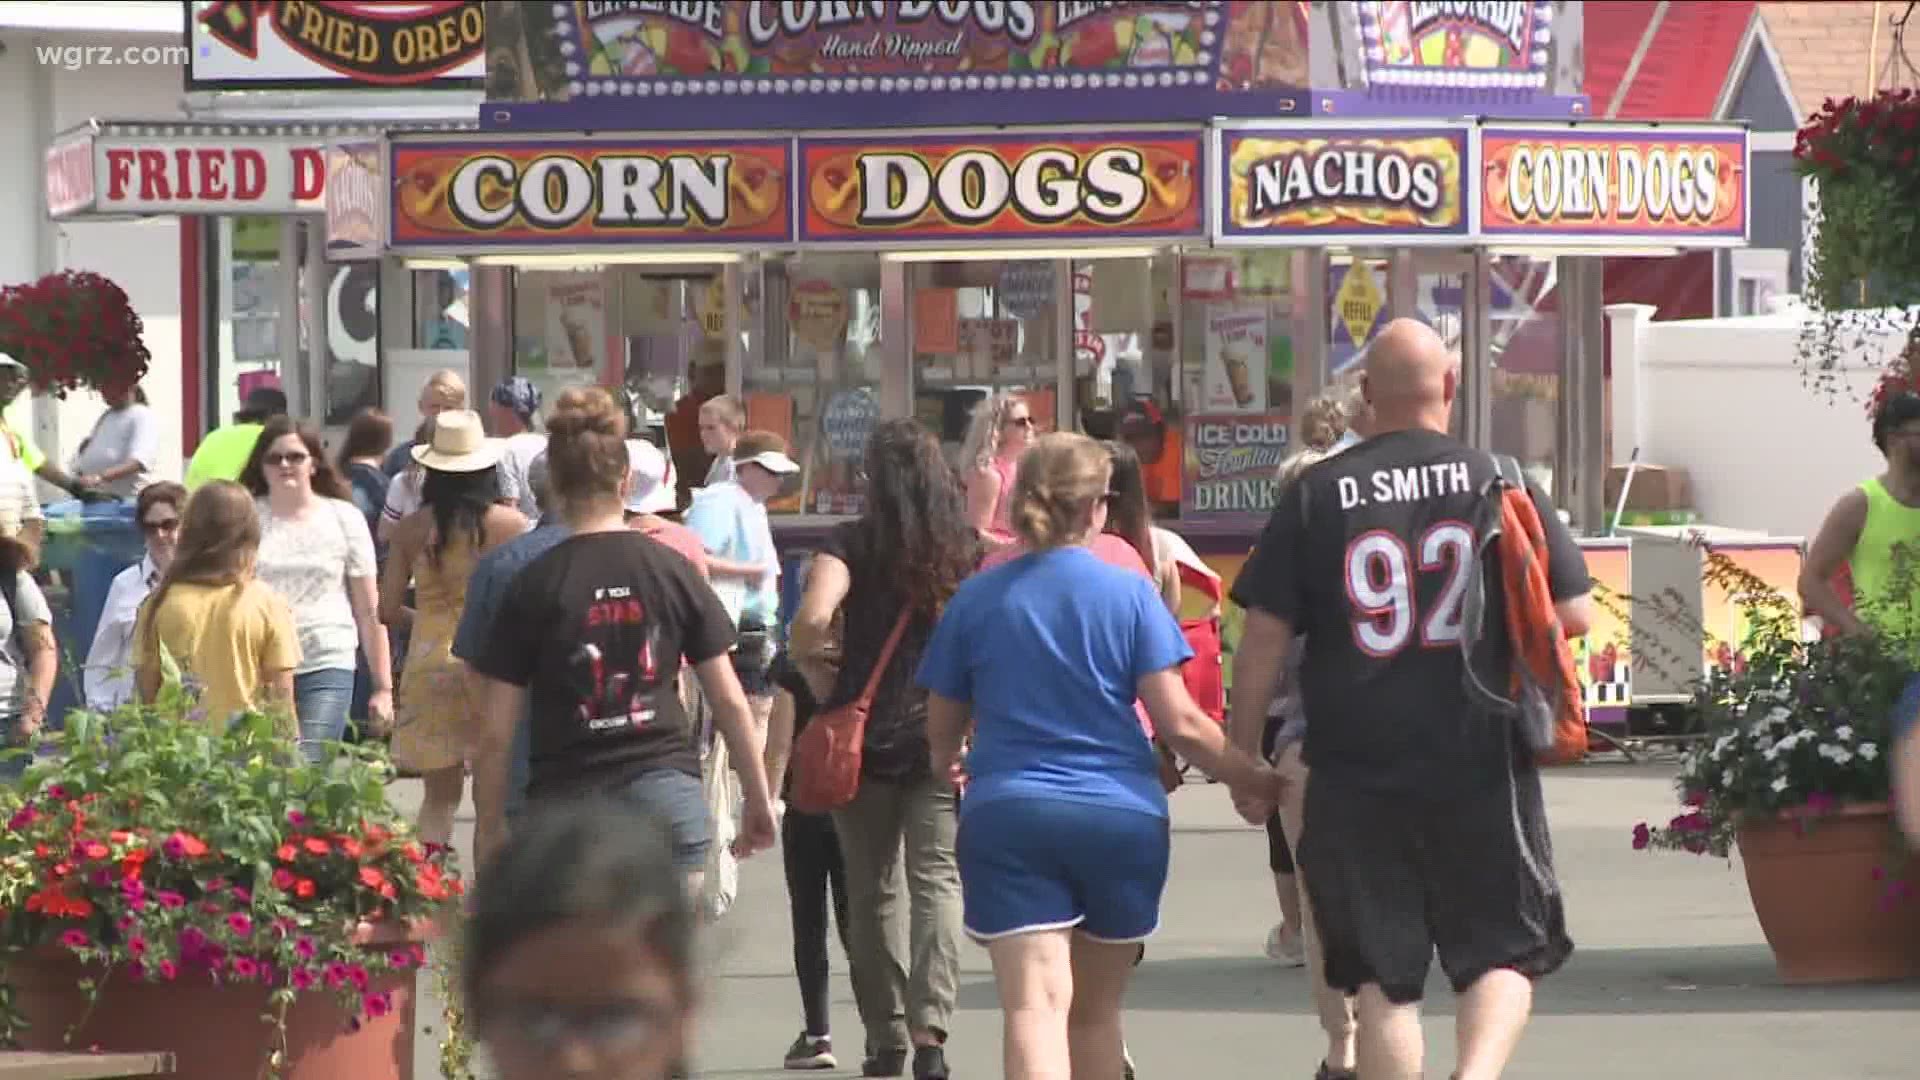 Plans unveiled for this year's Erie County fair